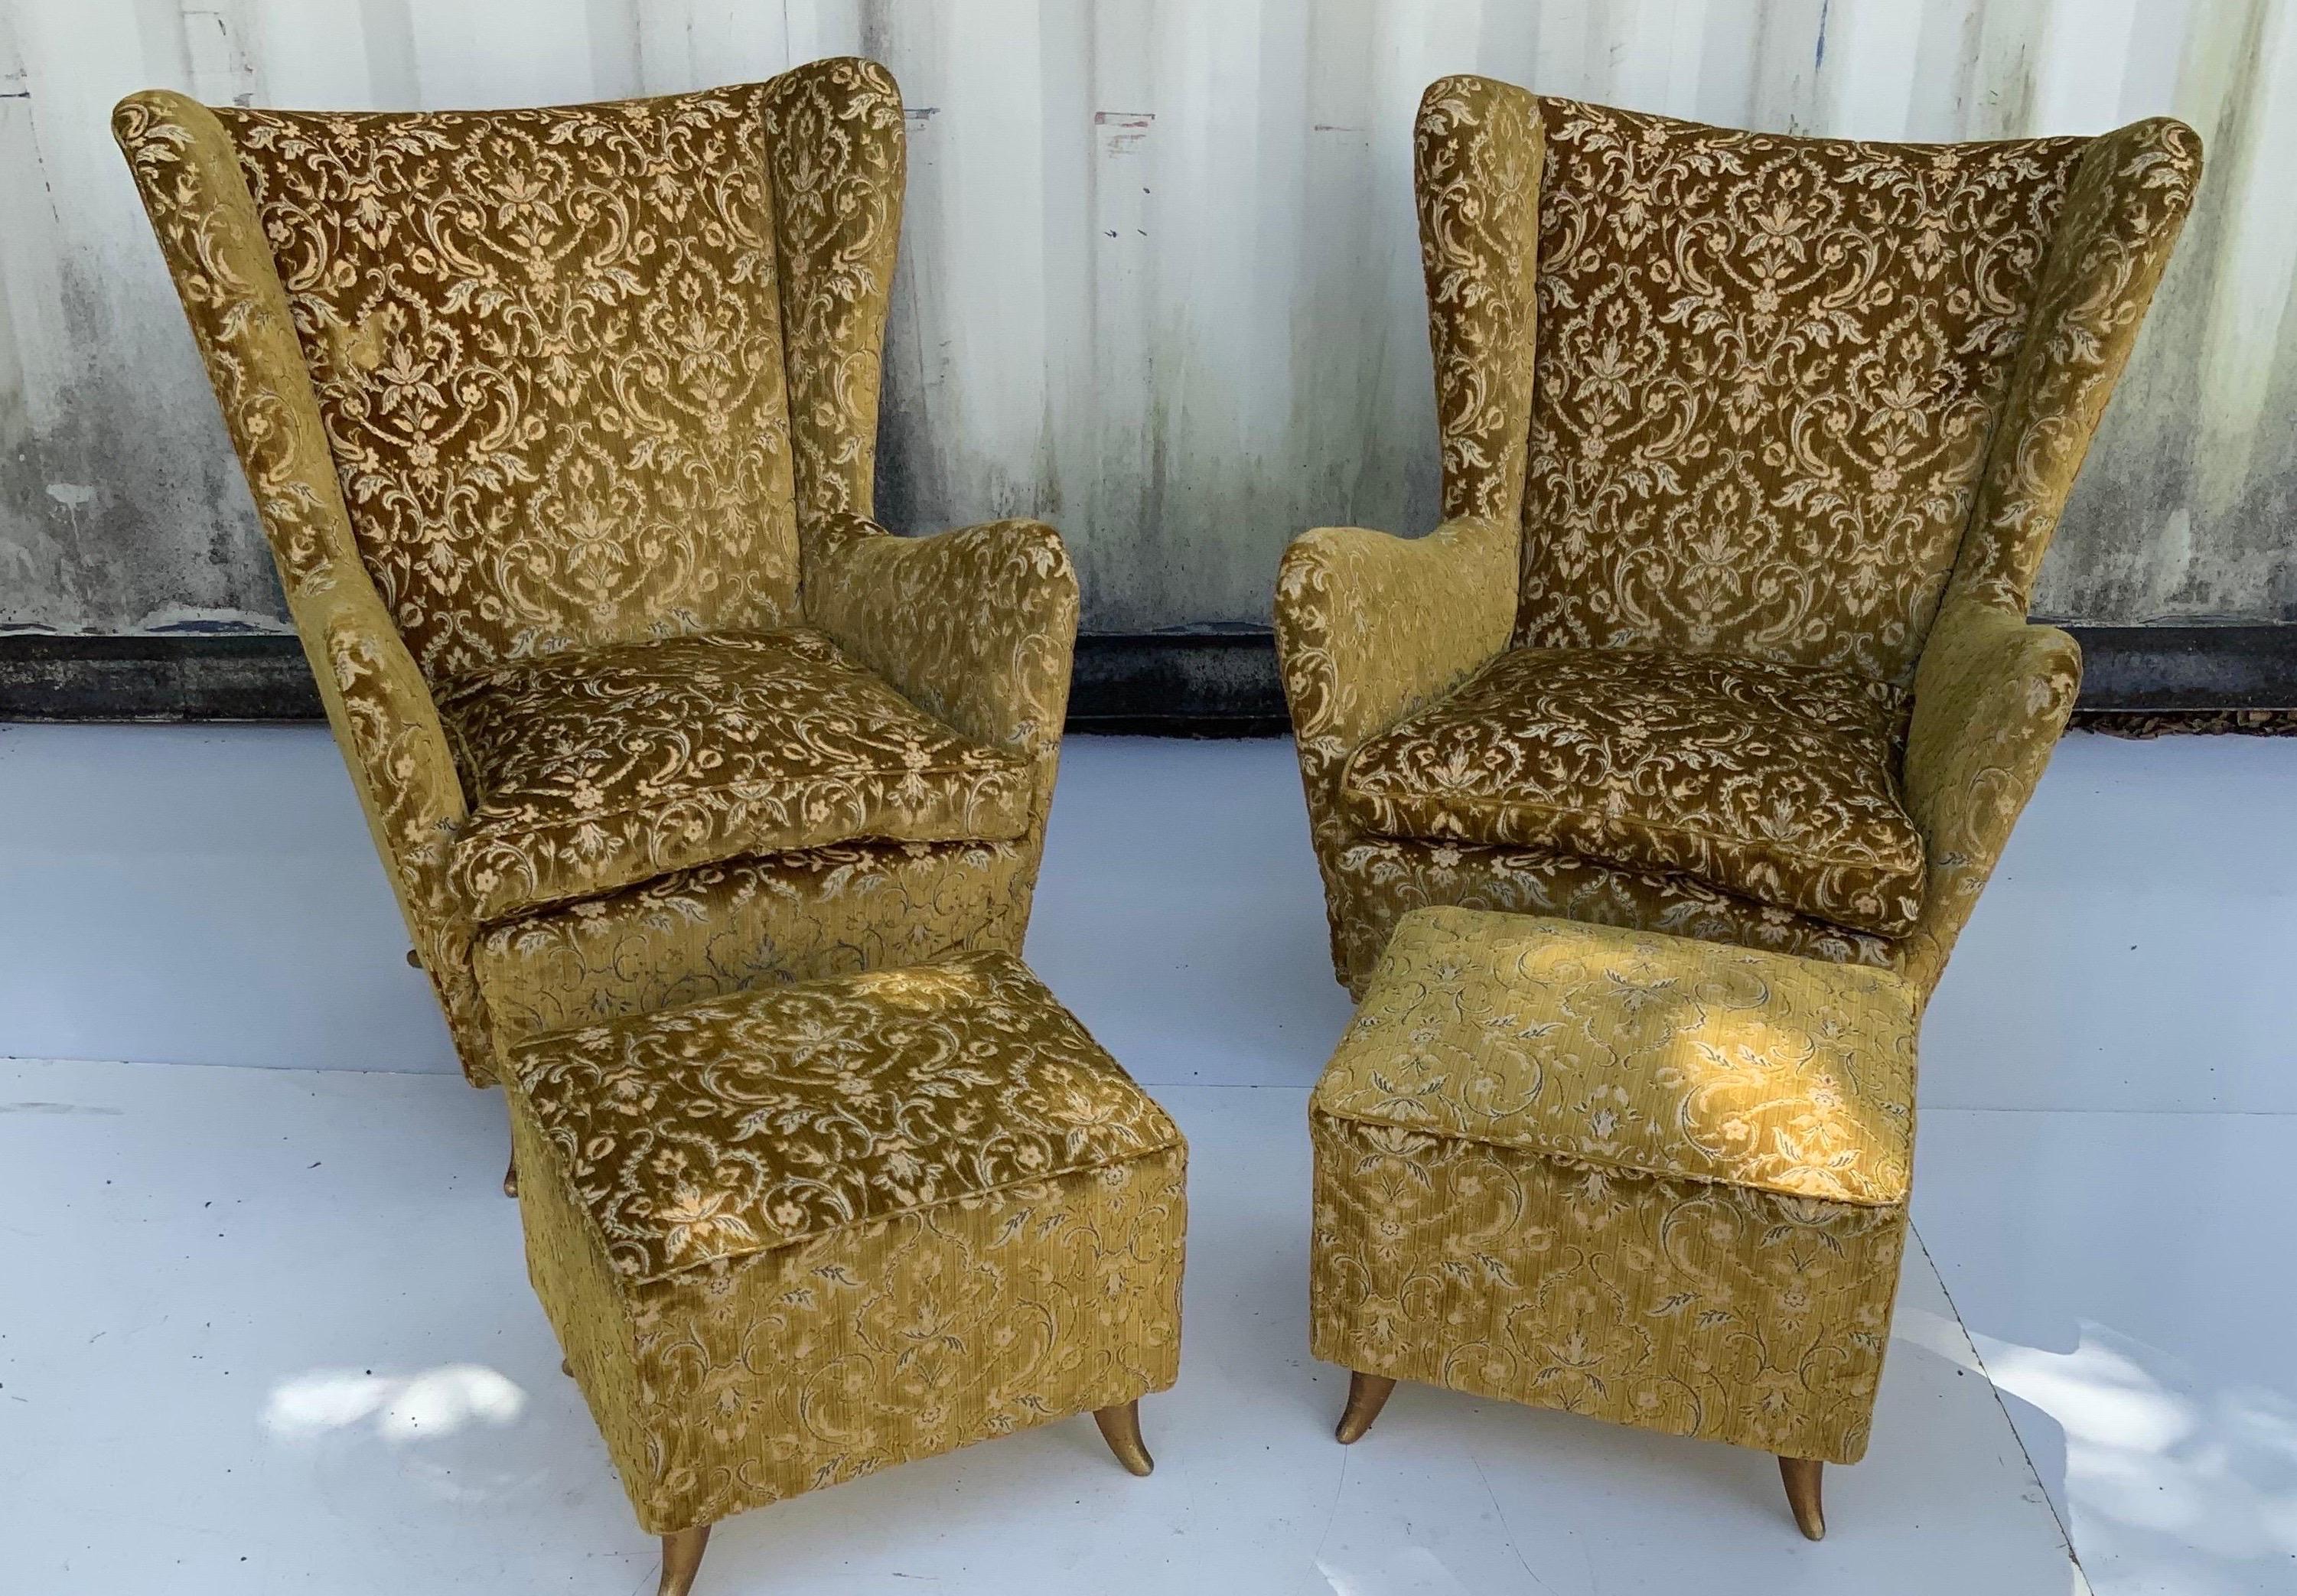 Rare Pair of ISA Bergamo High Back Lounge Chair with Ottoman, Italy 1950s.
Original Genova Velvet, in good condition.
Ottoman Size : 18 /16 /15.